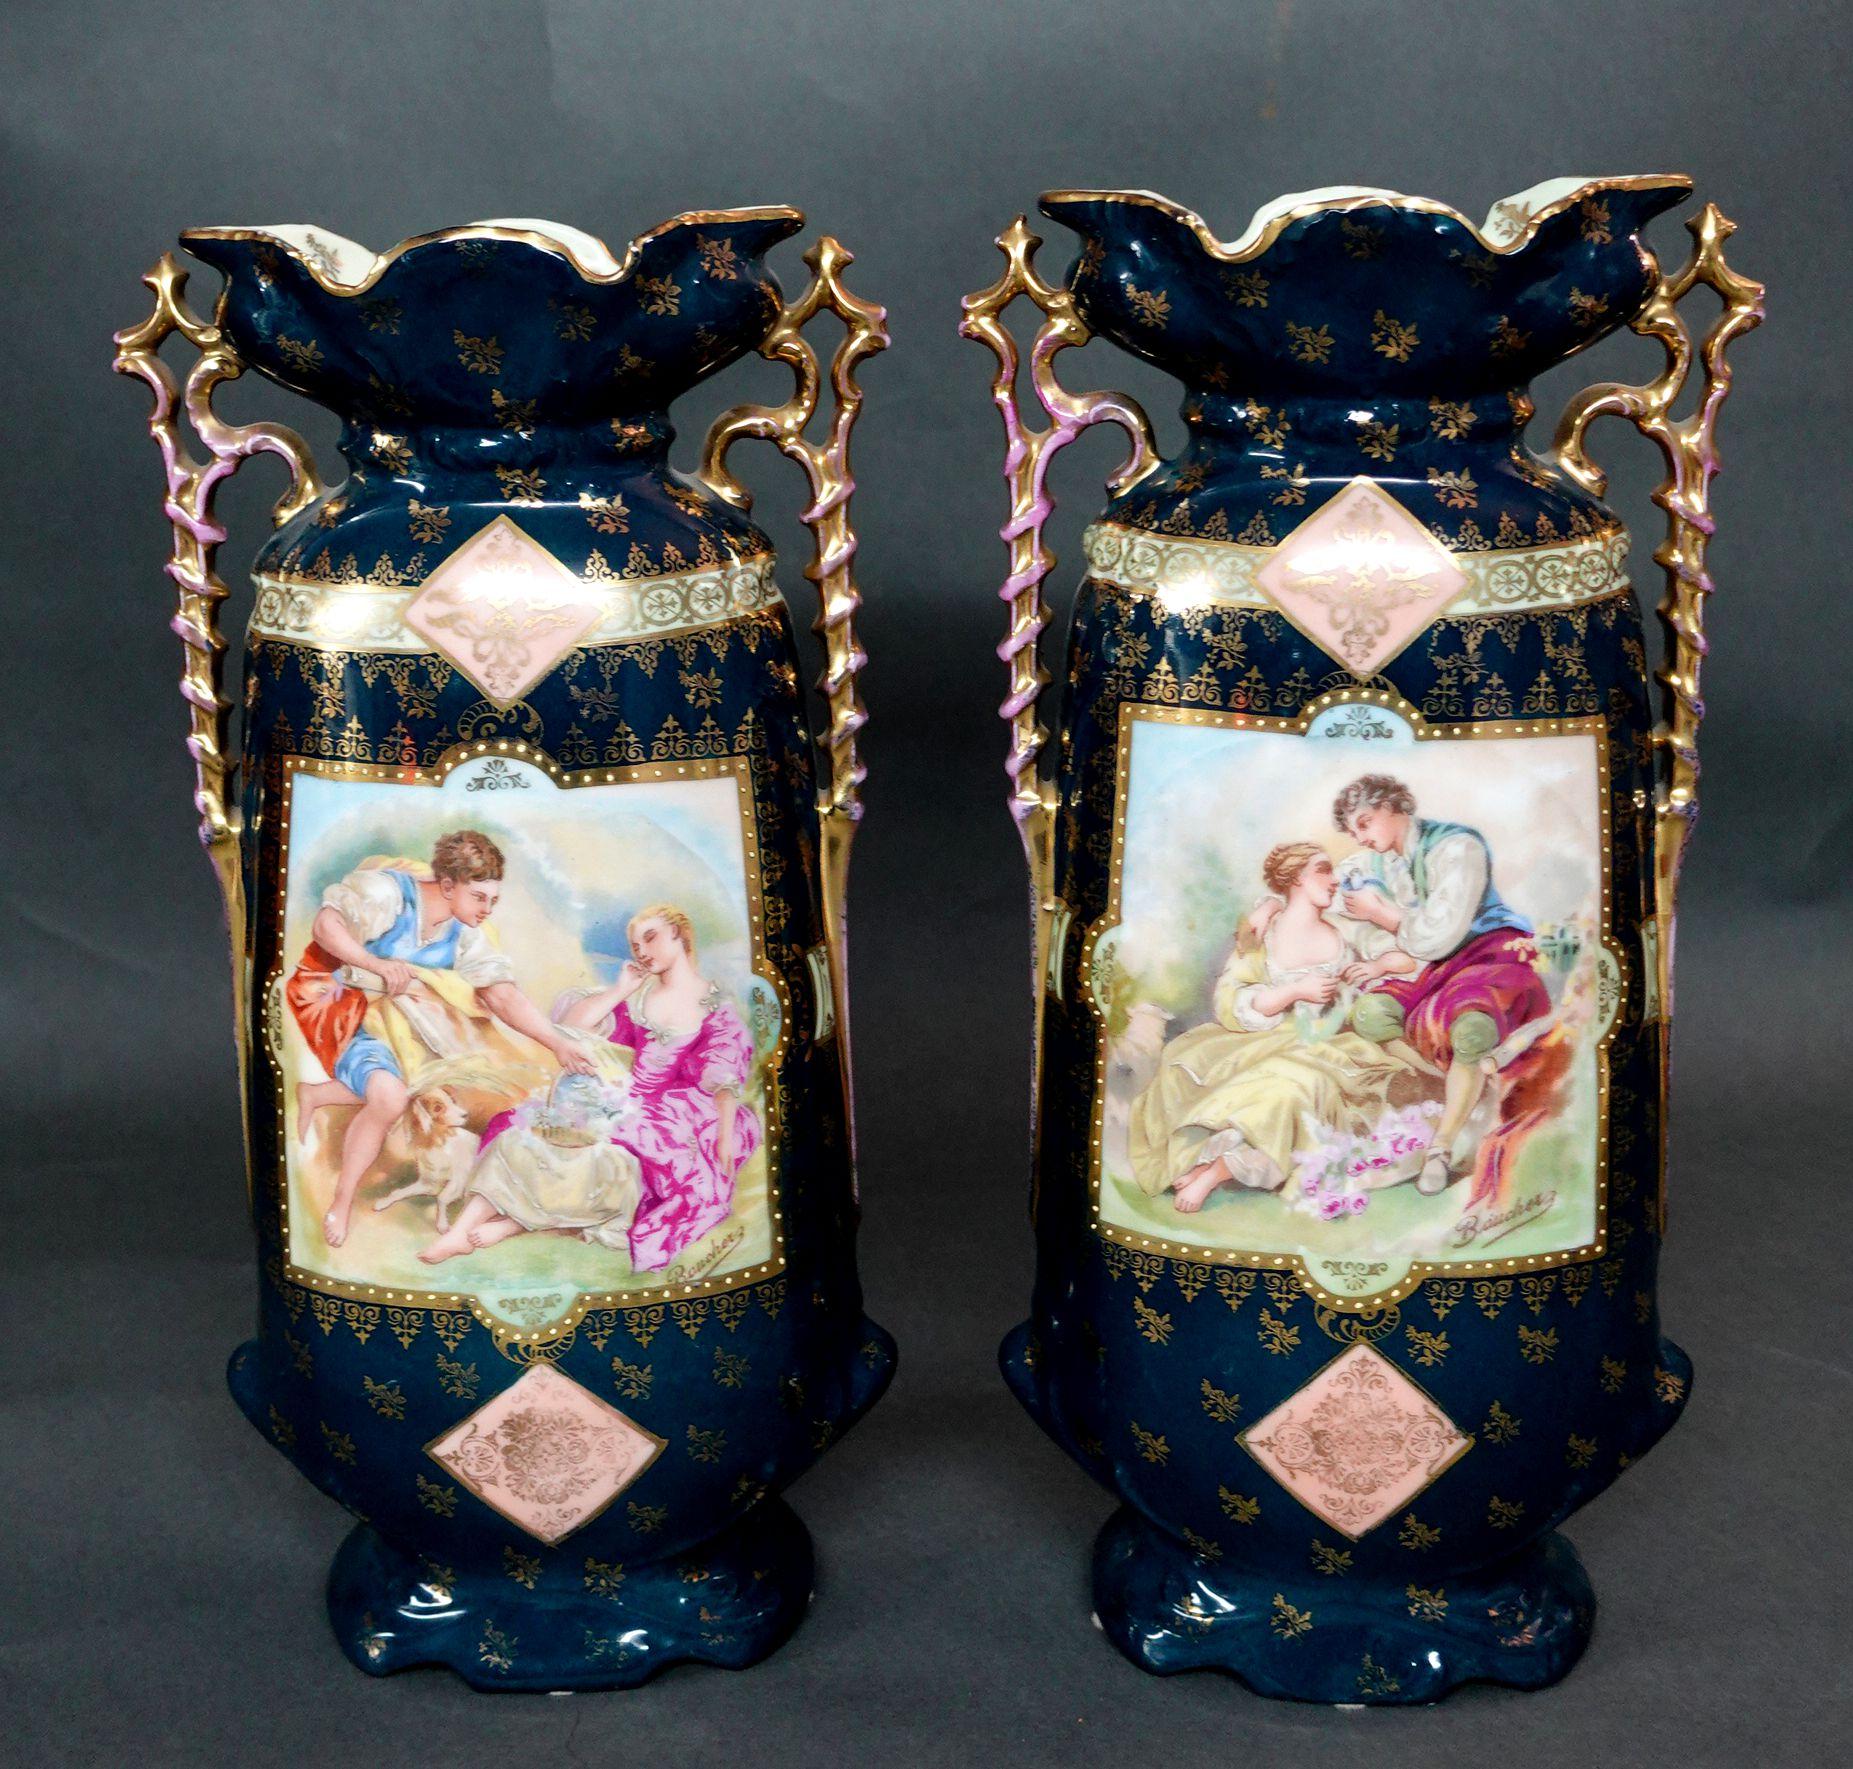 PAIR ORNATE PORCELAIN MANTEL VASES C. 19th century. The front of each vase with a courting scene painting by the French artist Boucher and overall with ornate gilt decoration, the underside of each marked Victoria Carlsbad Austria. Height 13.25